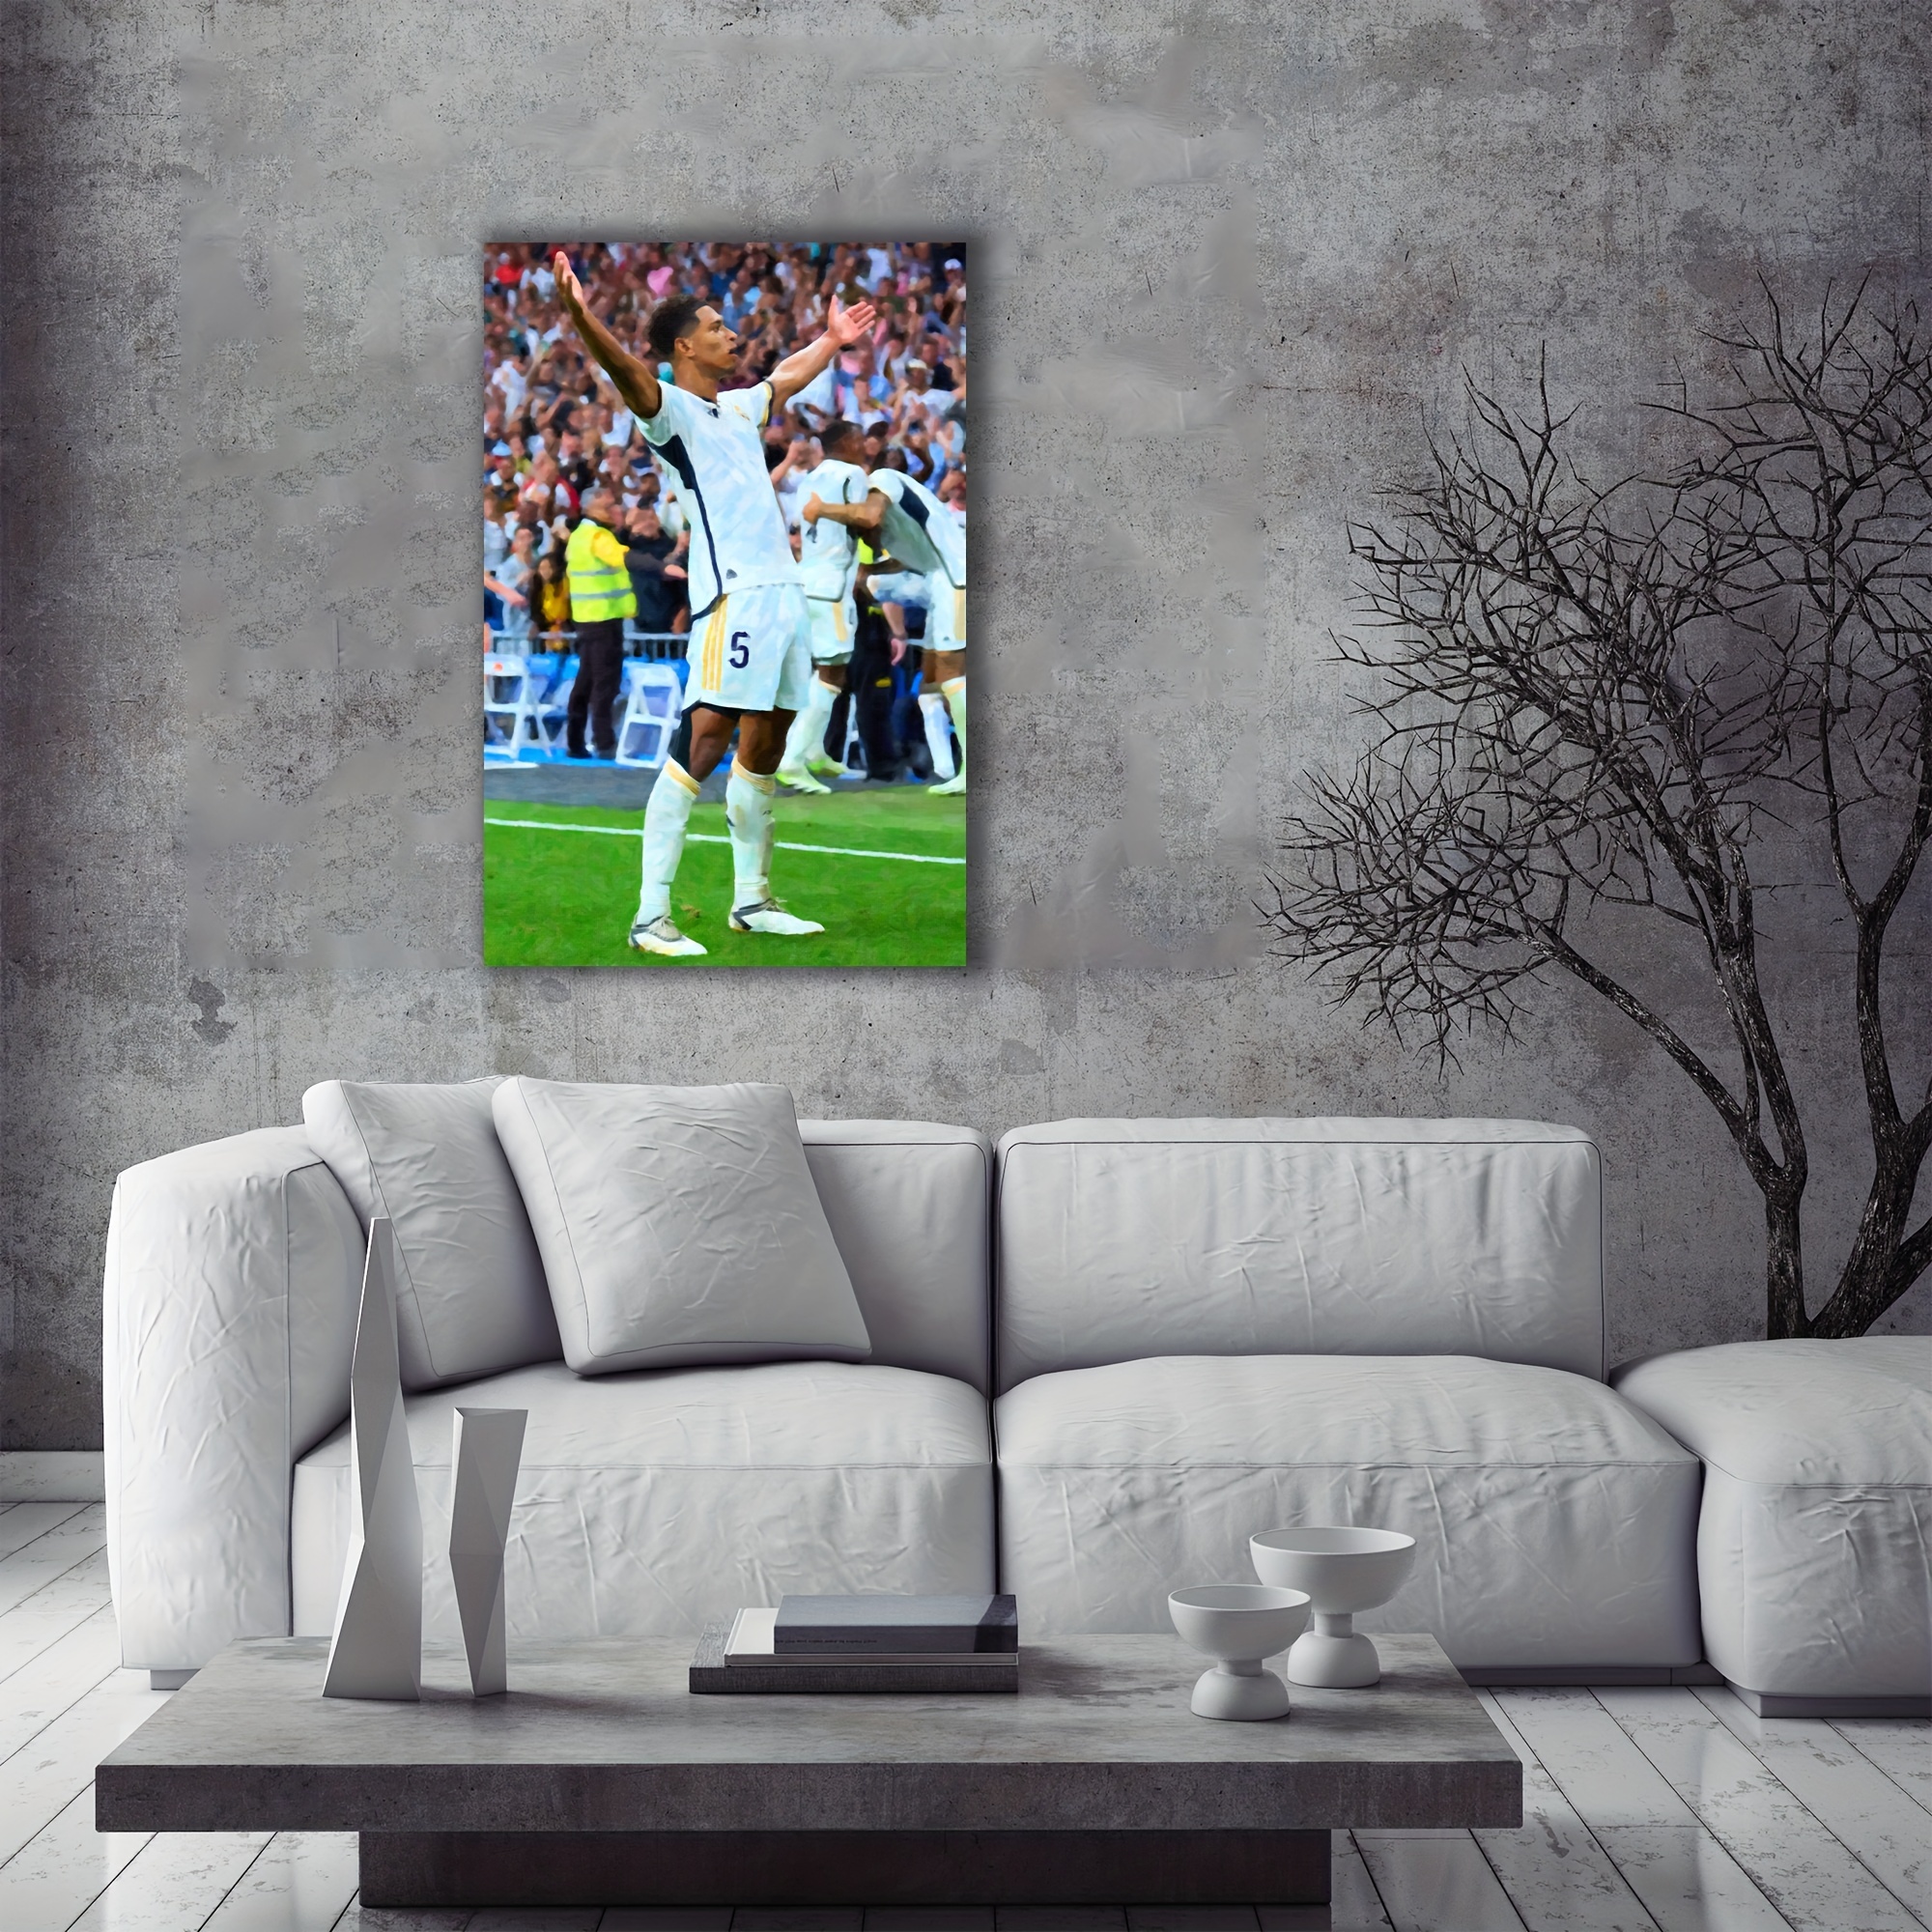 

1pc Unframed Canvas Poster, Soccer Celebration Posture Painting, Canvas Wall Art, Artwork Wall Painting For Gift, Bedroom, Office, Living Room, Cafe, Bar, Wall Decor, Home And Dormitory Decoration